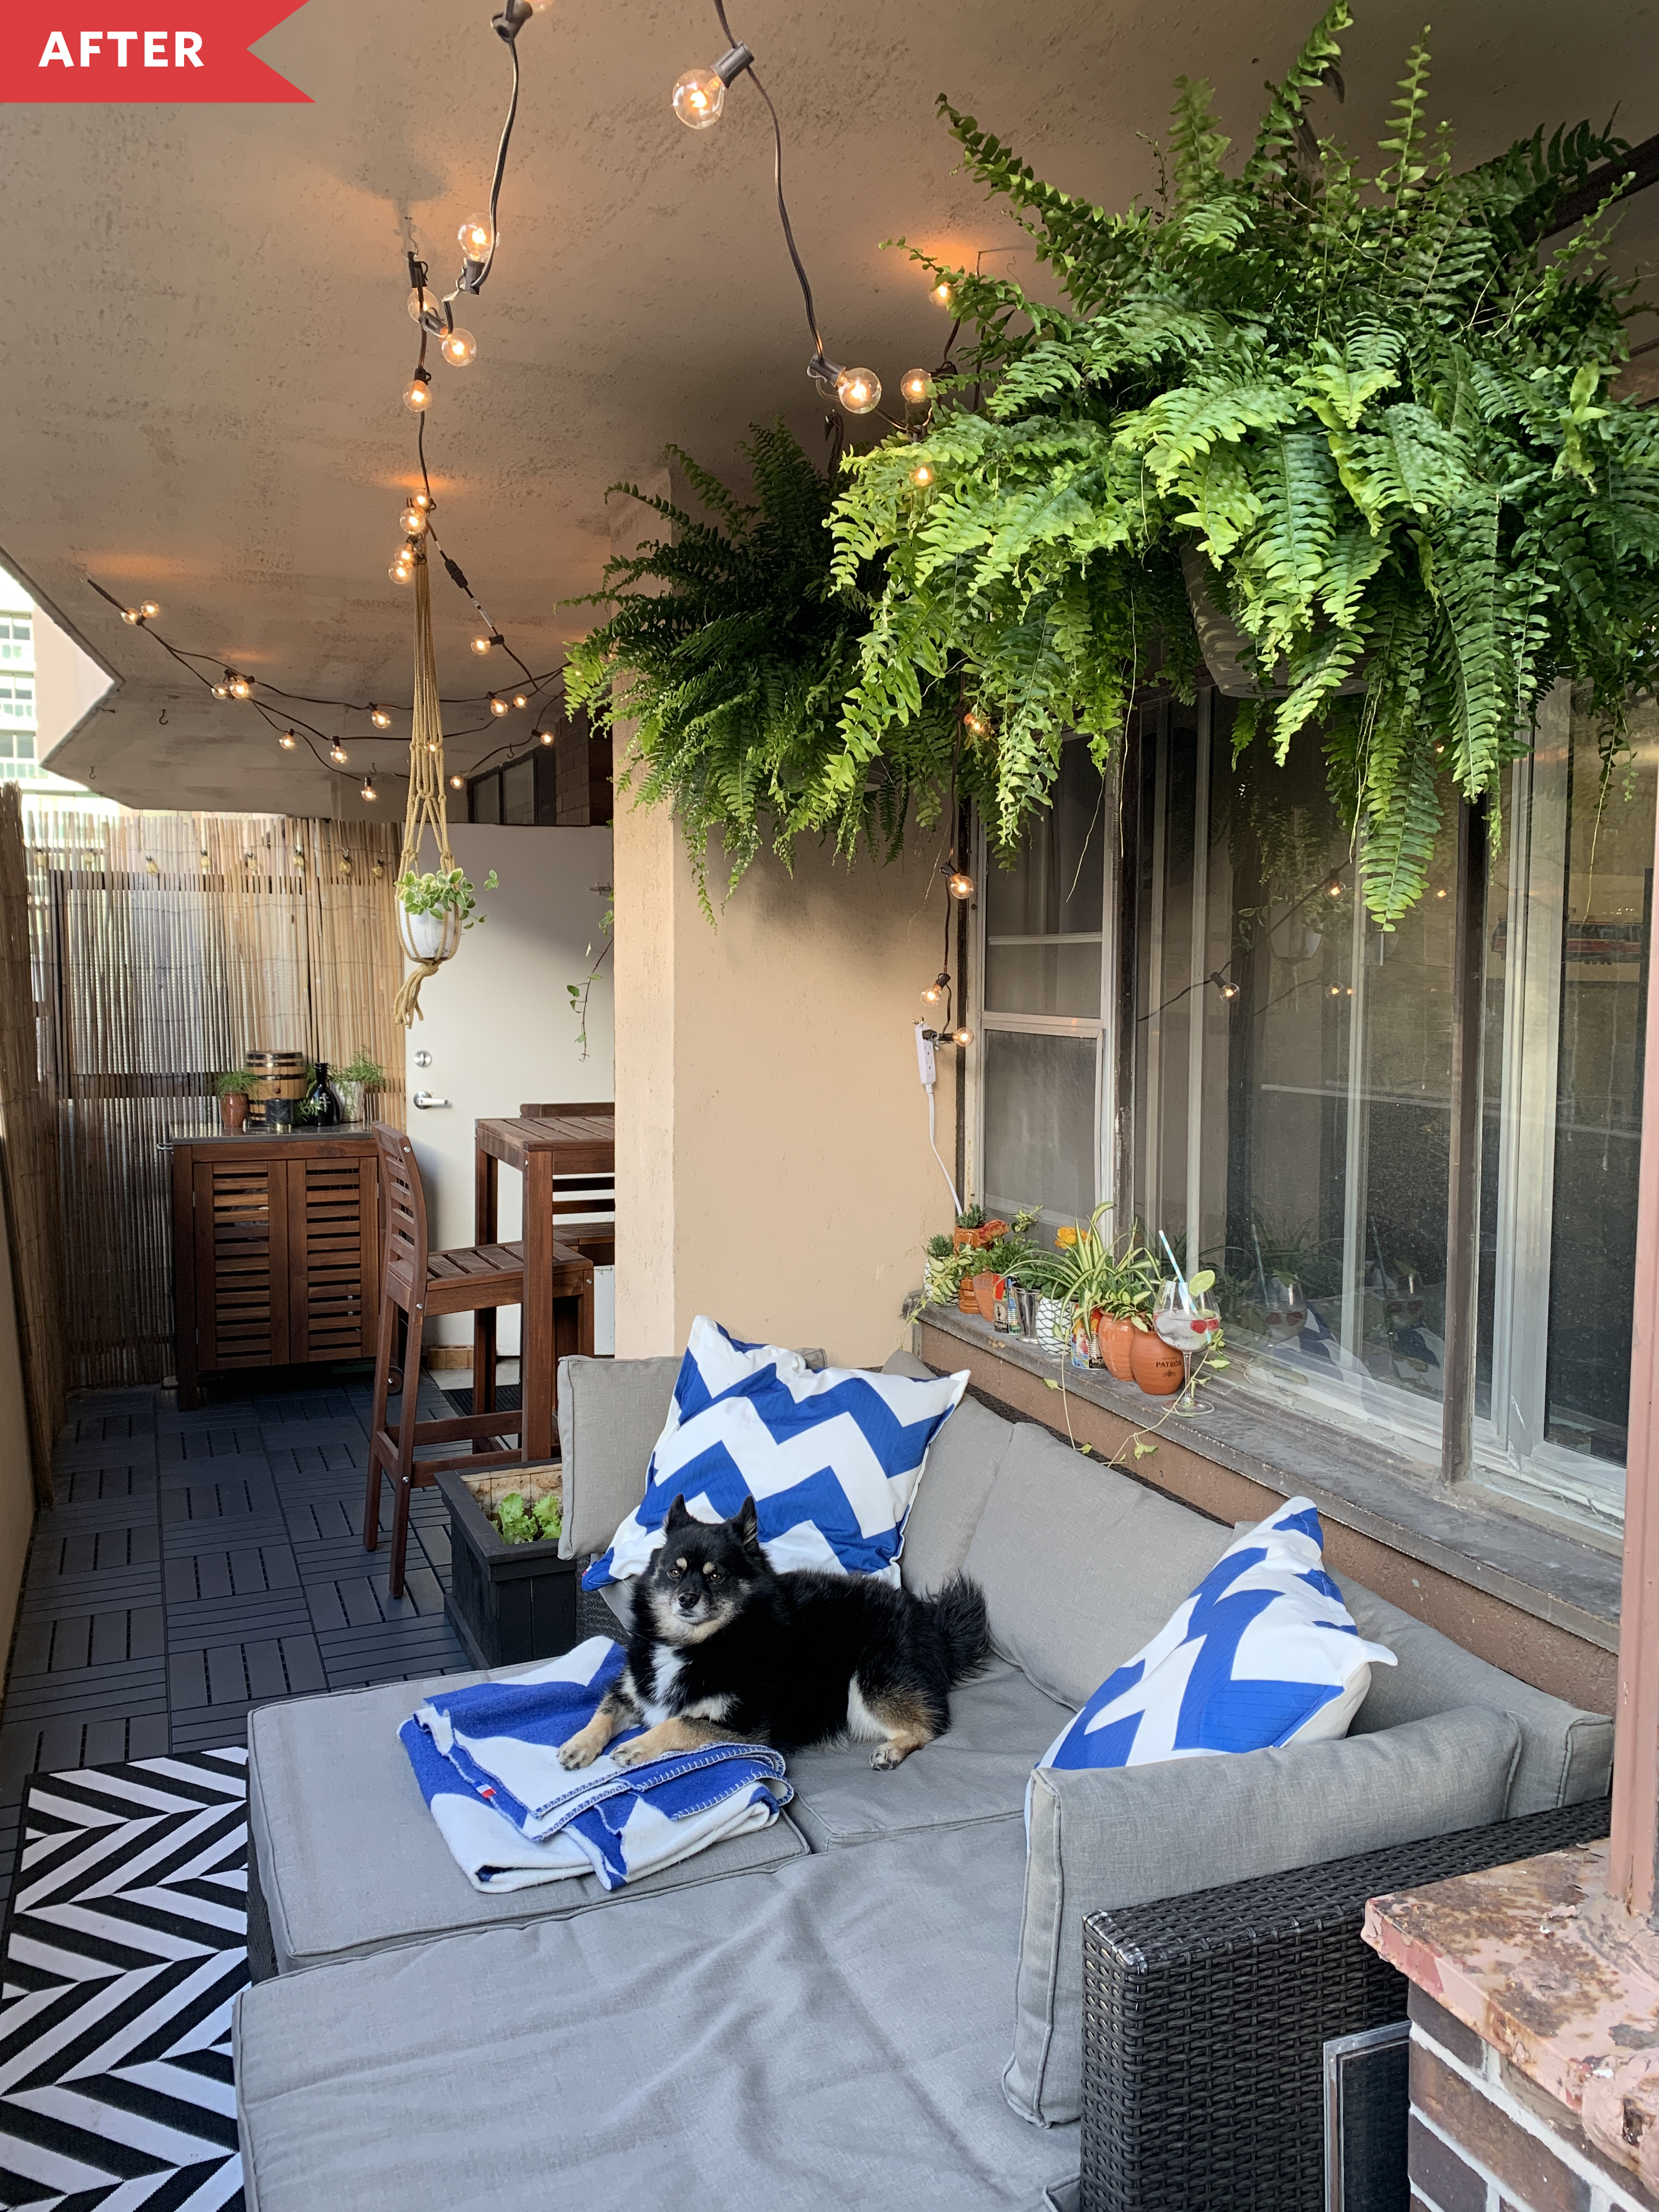 15 Apartment Patio Ideas - How to Decorate an Apartment Patio | Apartment  Therapy